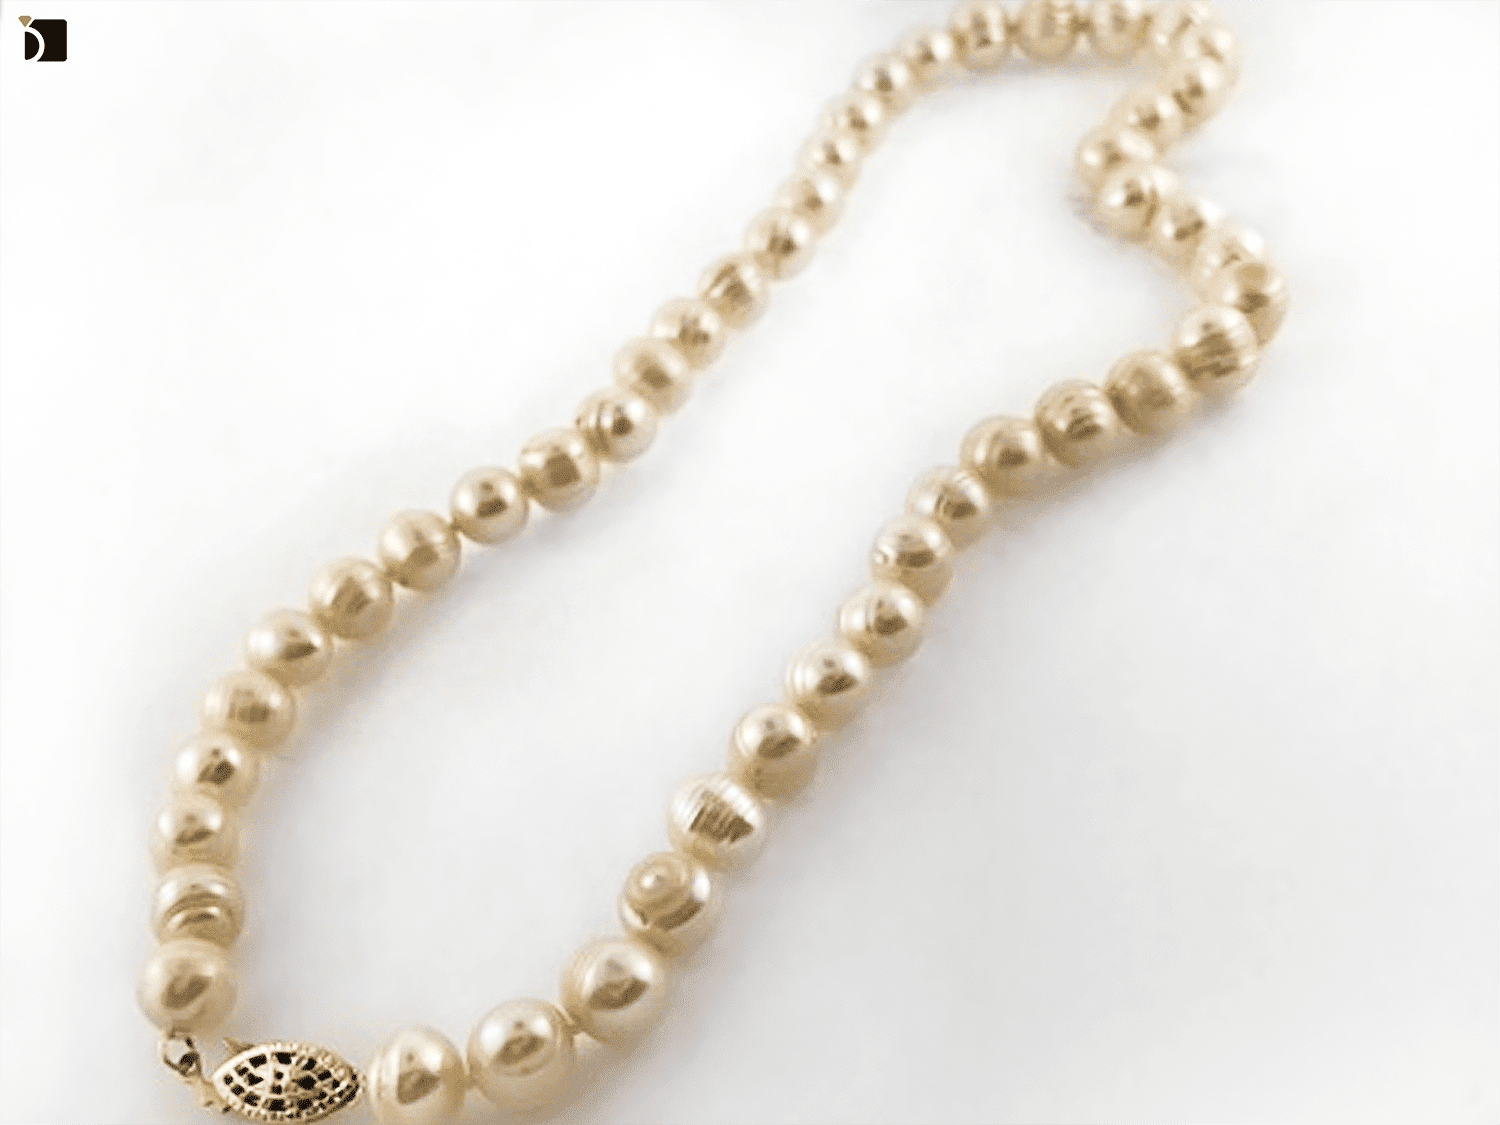 Image showcasing a string of pearls necklace after it gets a necklace repair